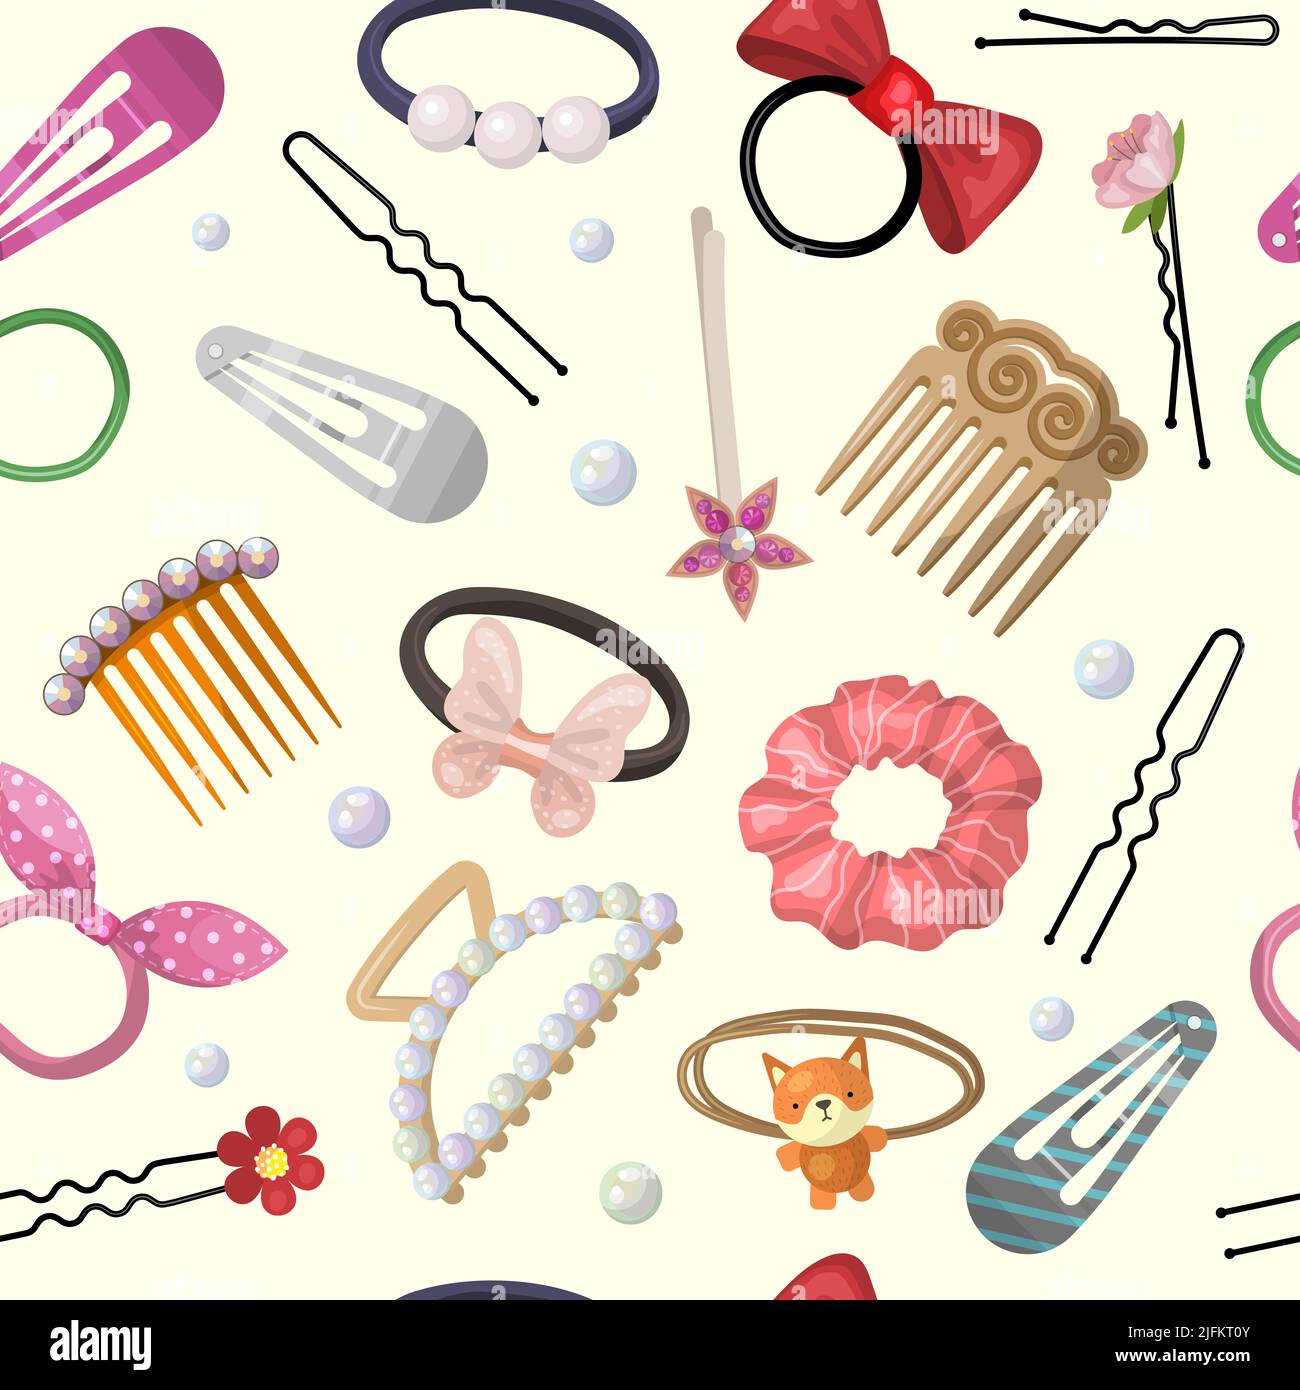 Hair accessories pattern. Beauty stylish items for hair grooming and care processes plastic pins rubber bands recent vector seamless background in Stock Vector